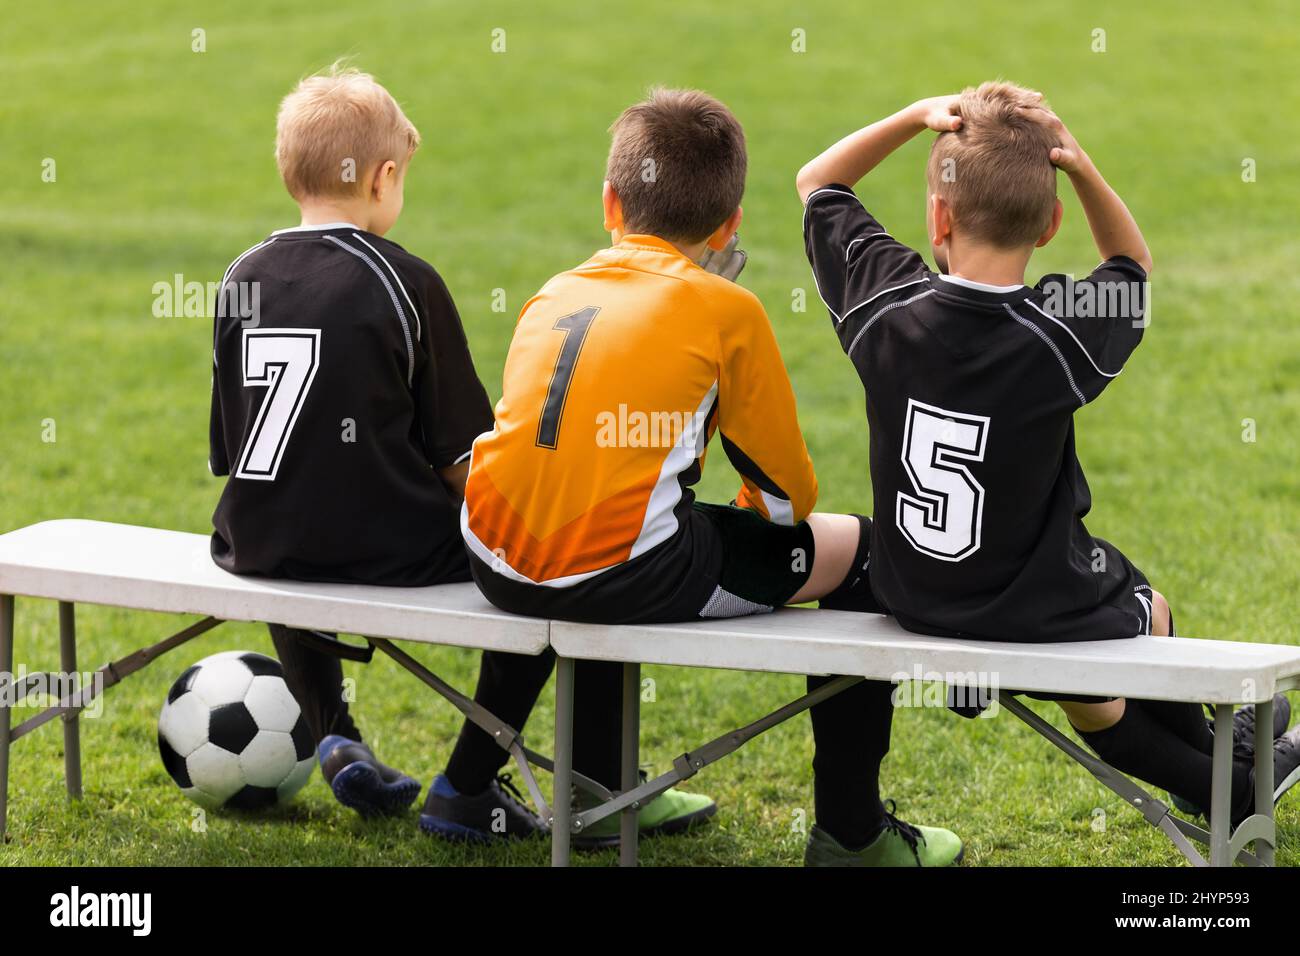 Soccer players sitting on sideline bench. School football team. Youth soccer players sitting together on substitute bench and watching match Stock Photo